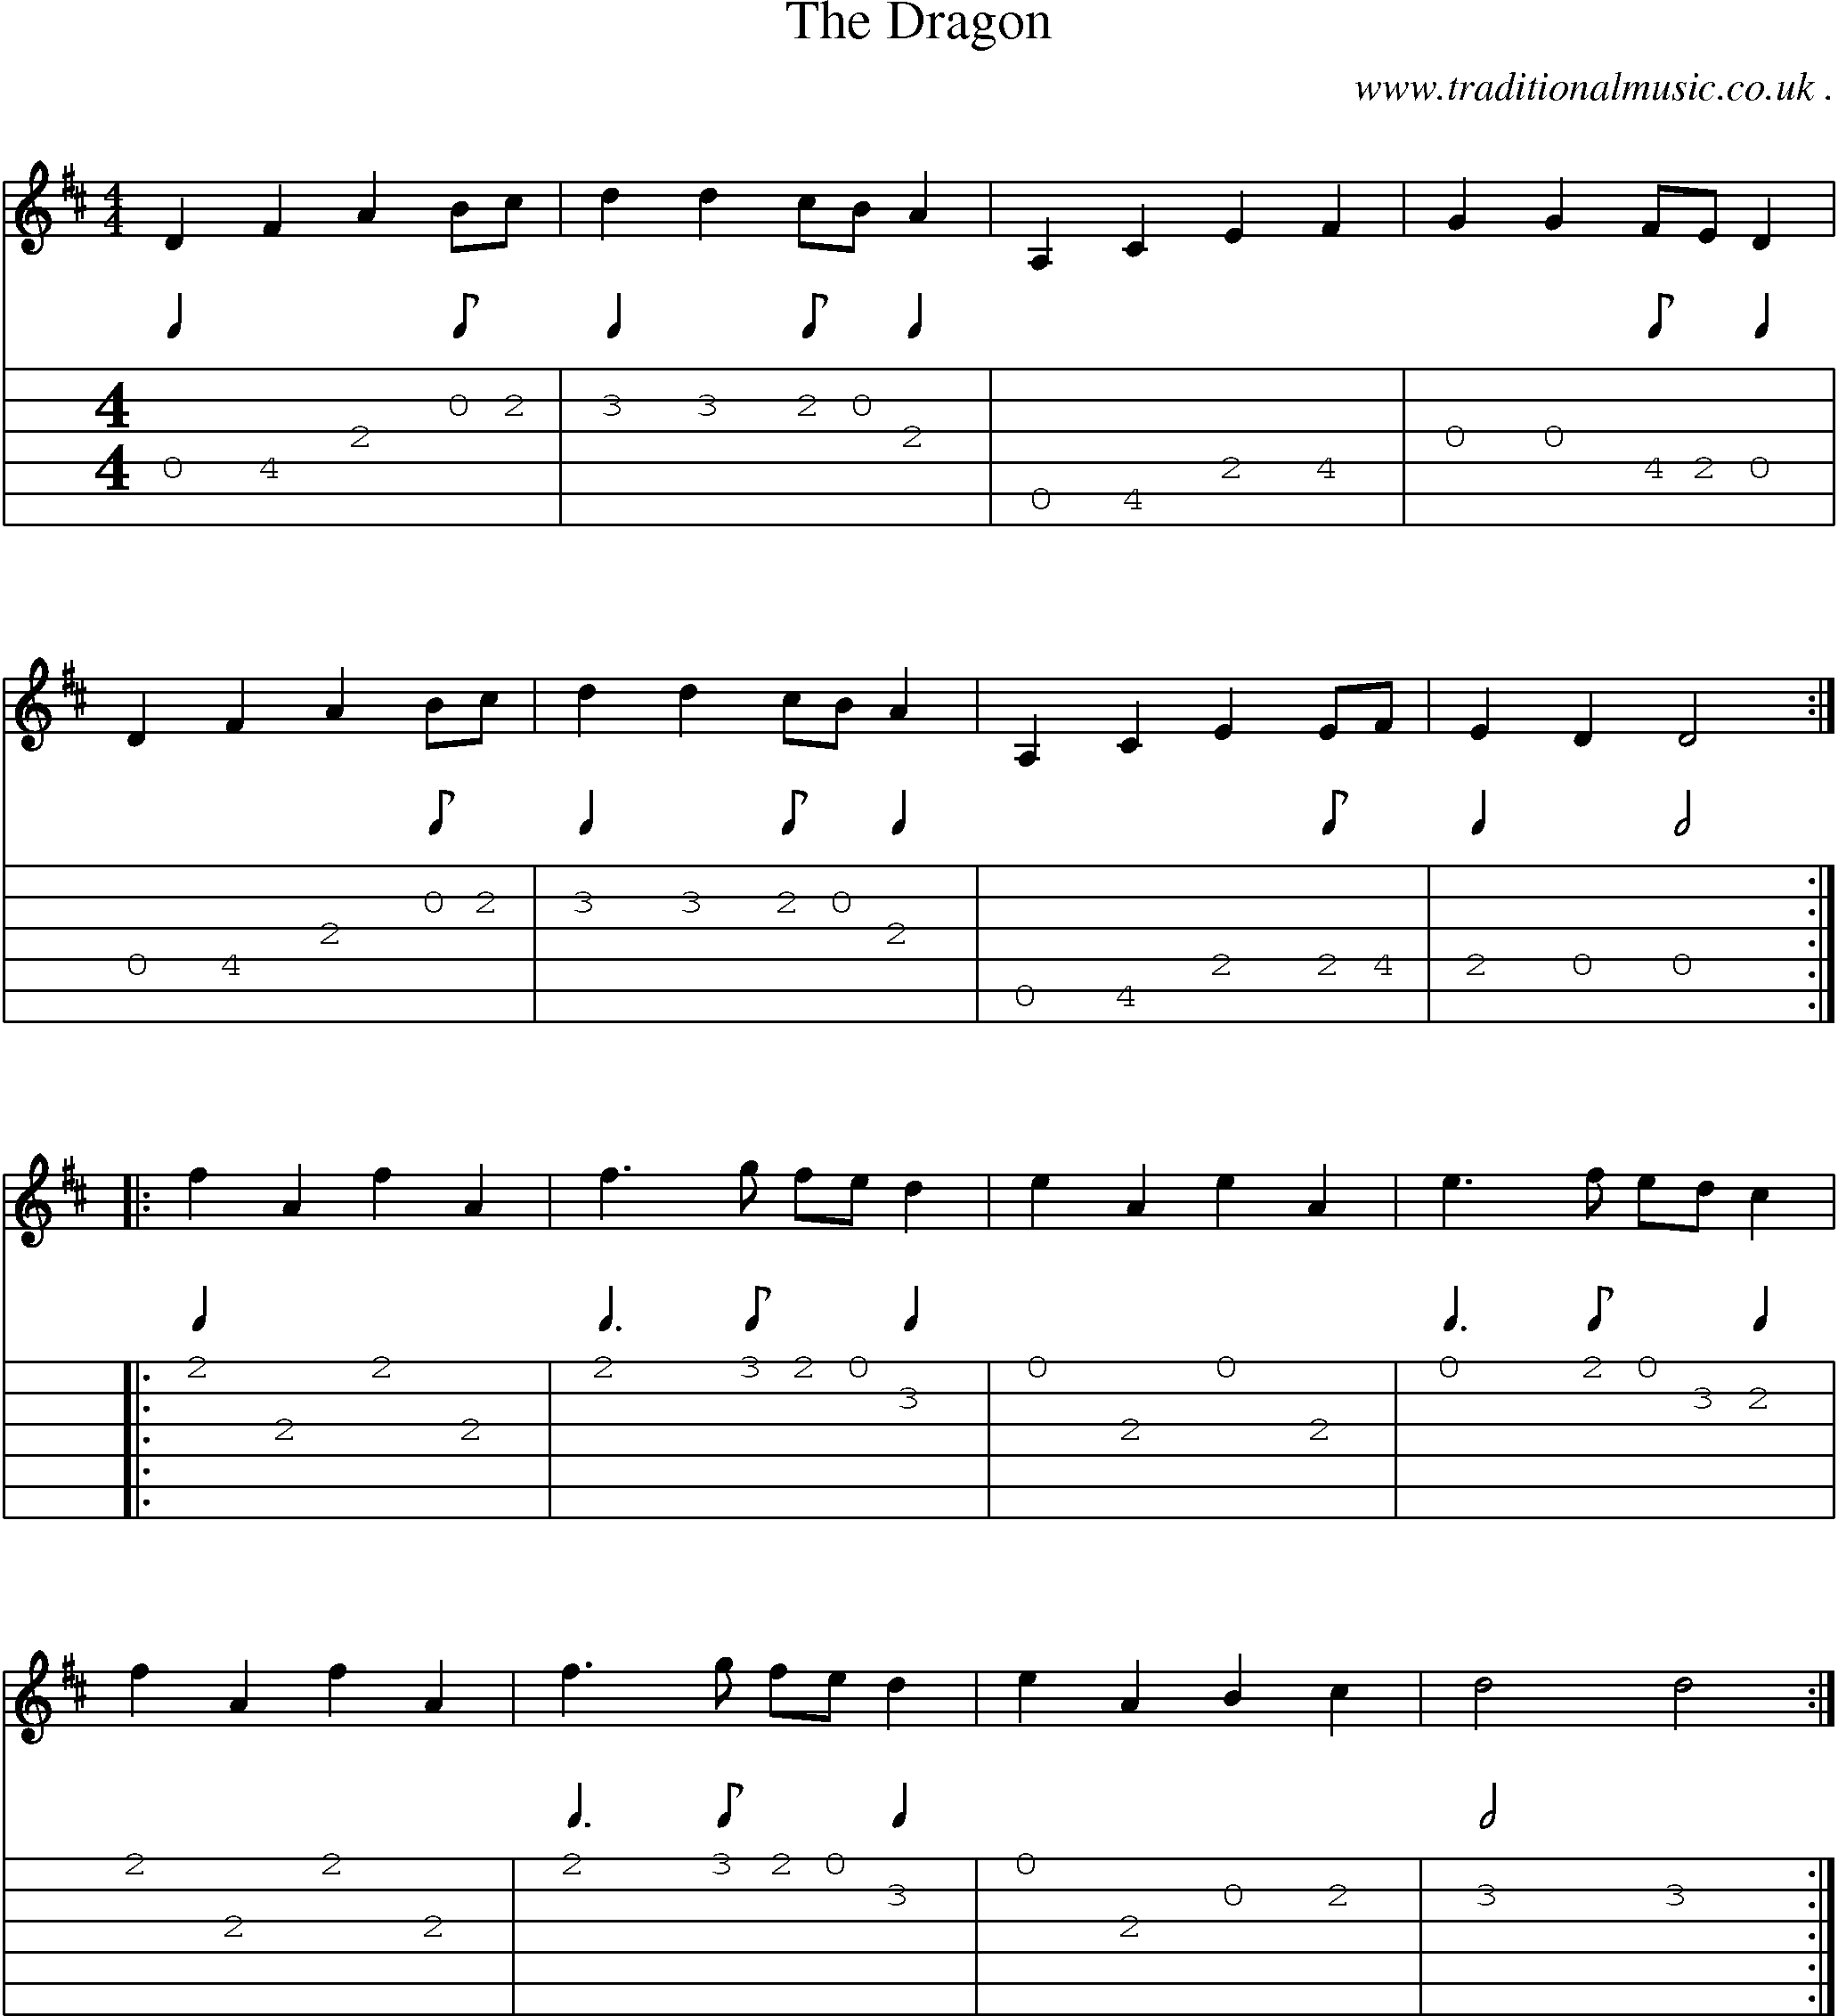 Sheet-Music and Guitar Tabs for The Dragon